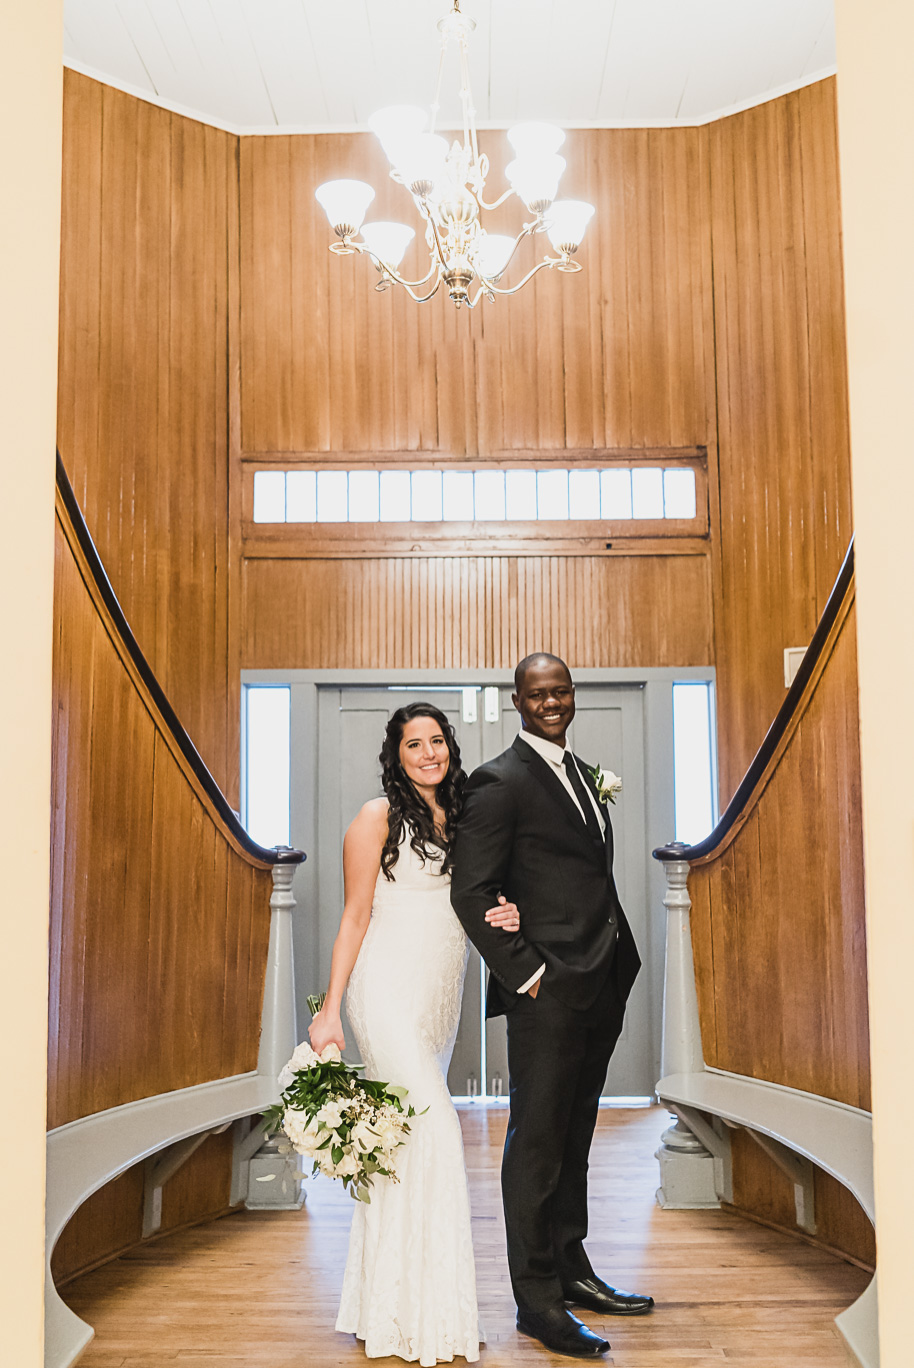 Lapeer Historical Courthouse wedding in Lapeer, Michigan provided by Kari Dawson, top-rated Southeastern Michigan wedding and engagement photographer, and her team.